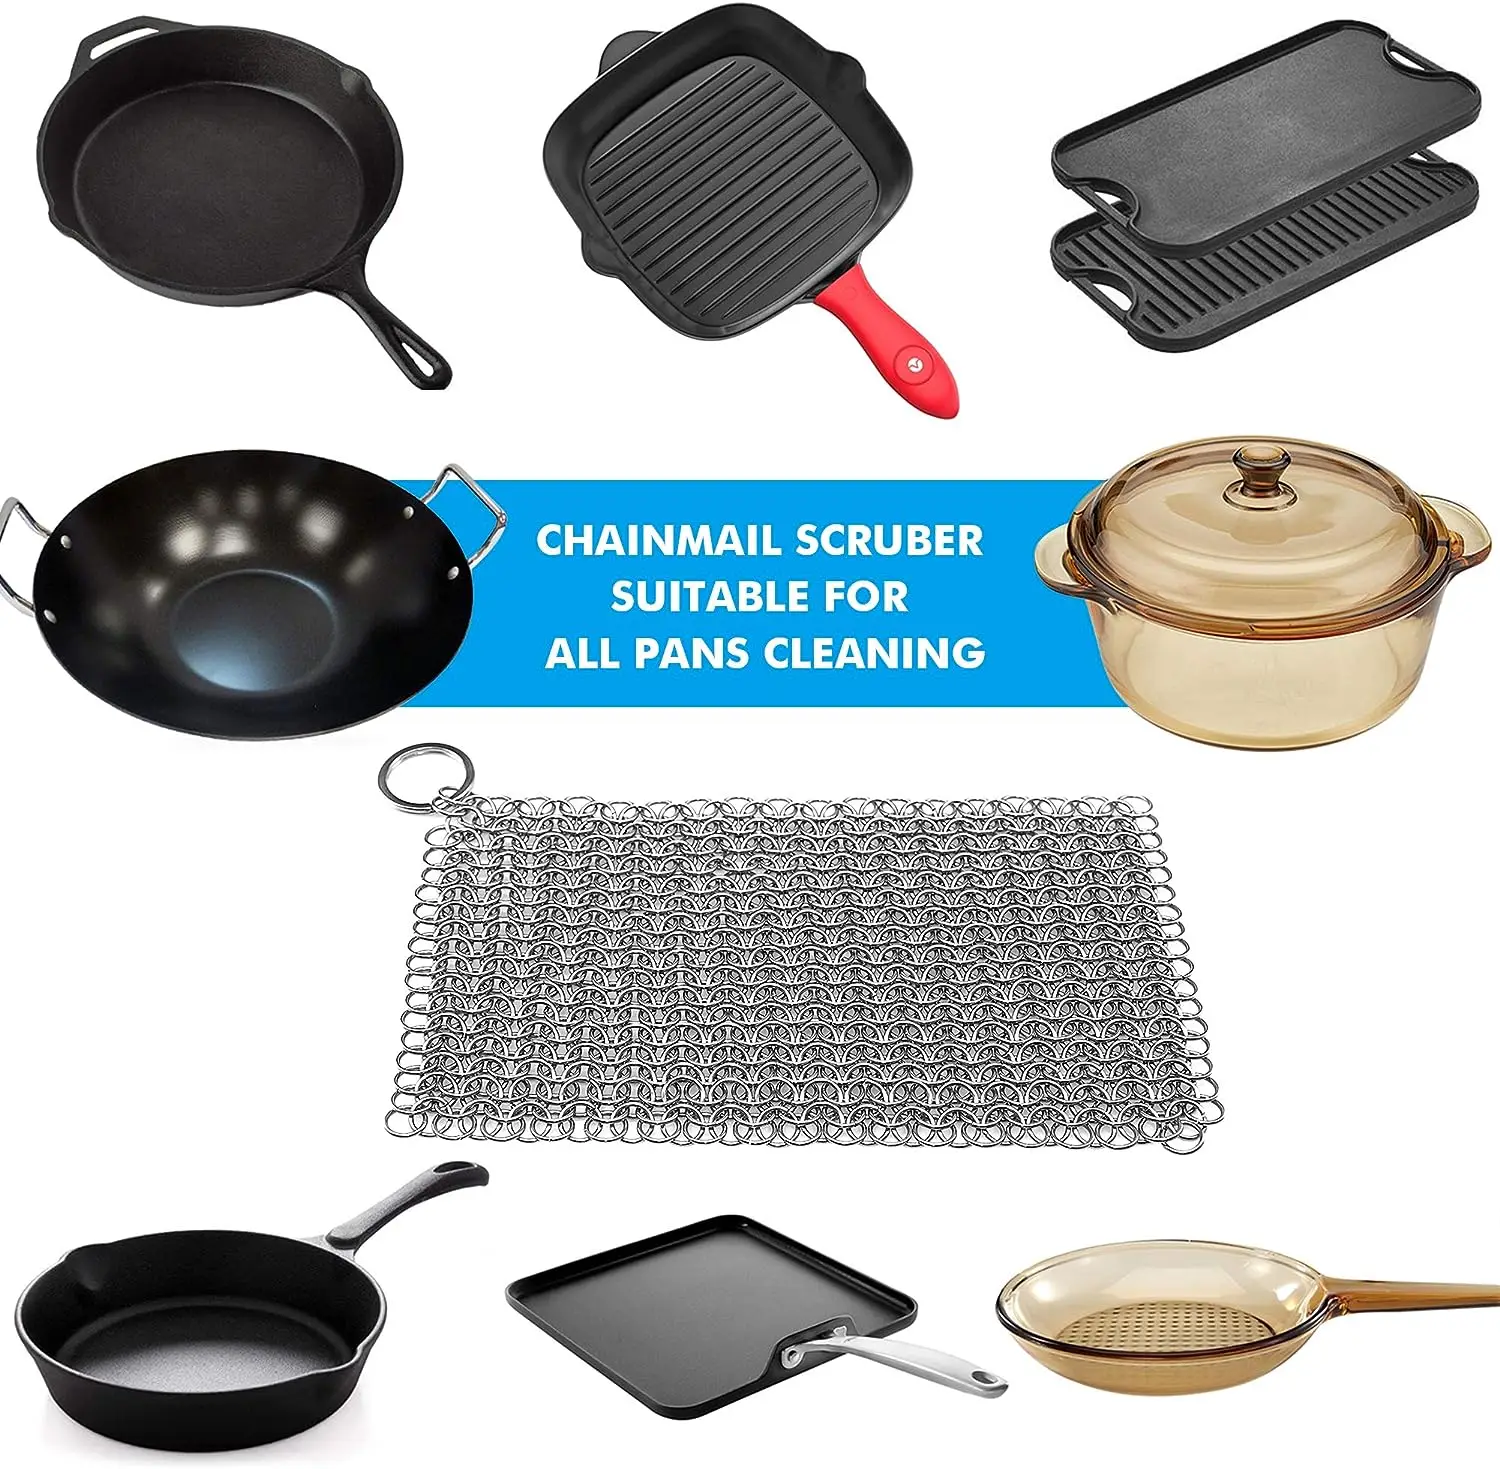 https://ae01.alicdn.com/kf/S88fce18f97f741f4ad28a1e59ec25aff5/Cast-Iron-Cleaner-Premium-316-Stainless-Steel-Skillet-Chainmail-Scrubber-for-Cast-Iron-Pan-Pre-Seasoned.jpg